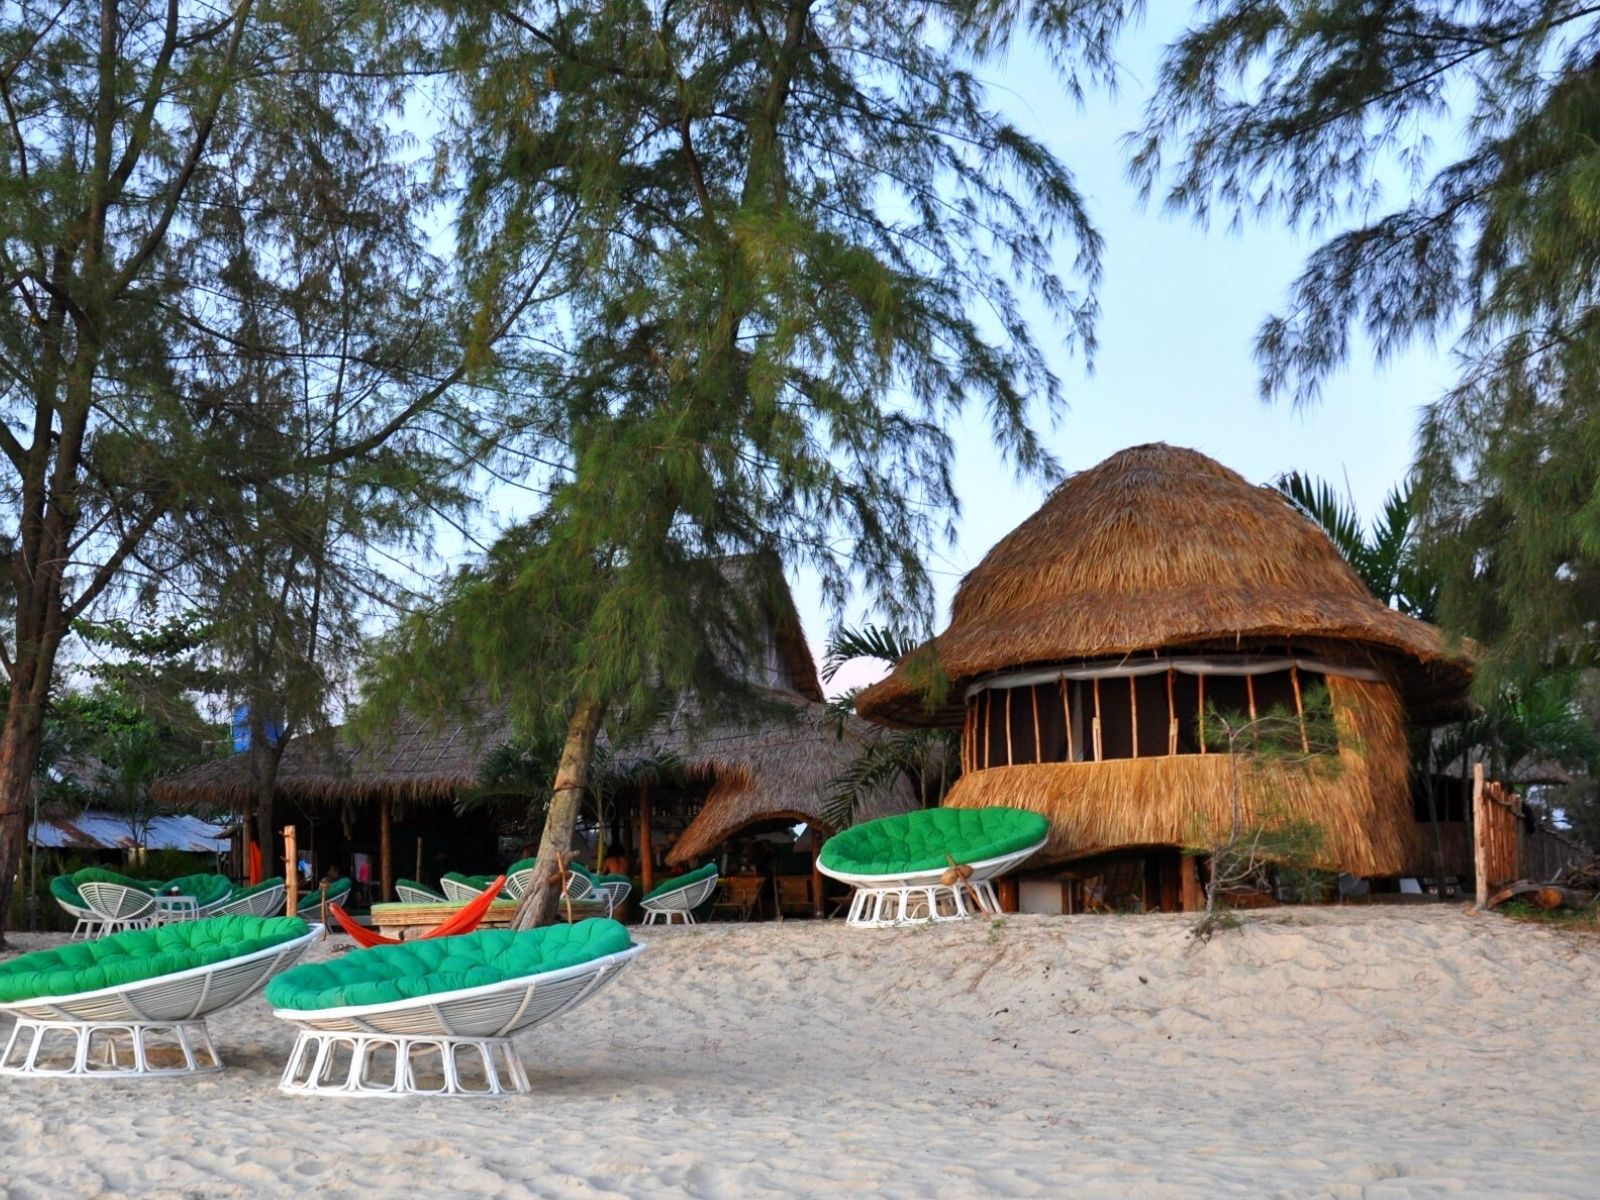 Huts with a rustic exterior is a common sight along the beaches in Otres